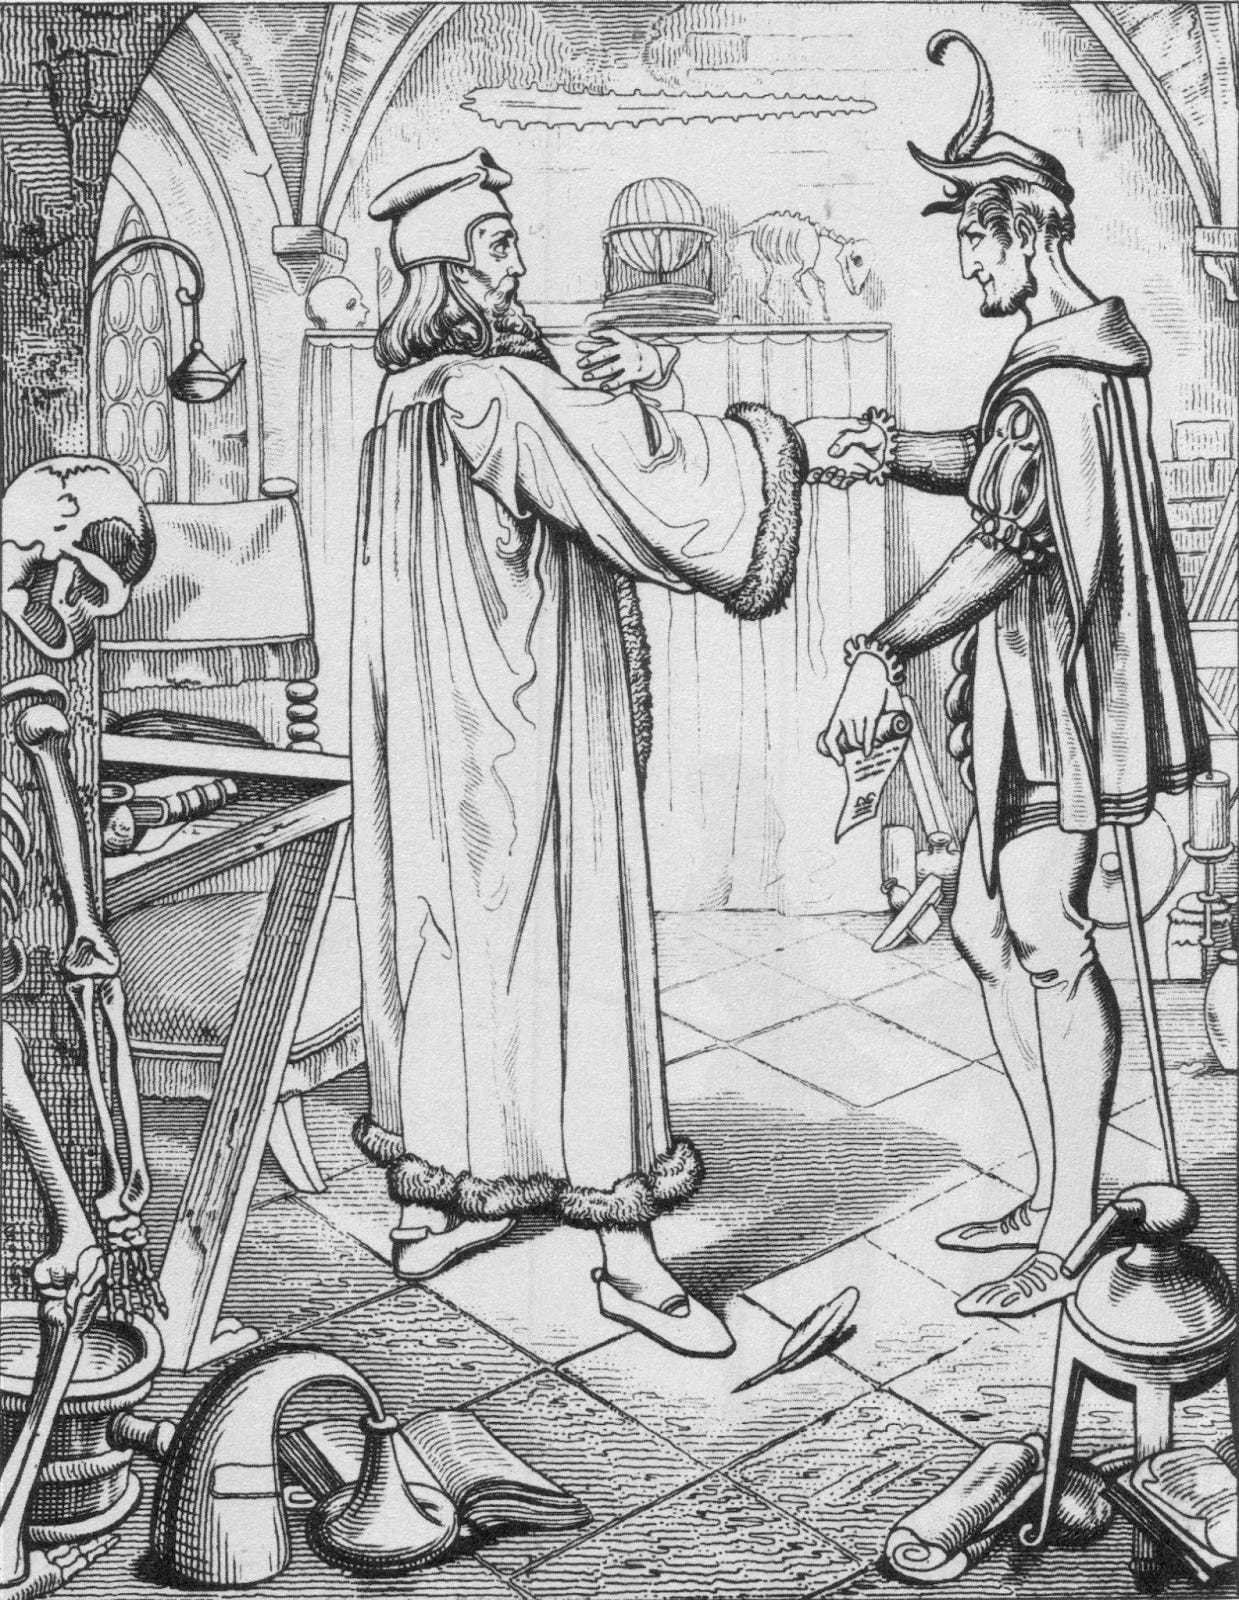 Engraving of Faust's pact with Mephisto, by Adolf Gnauth (circa 1840)